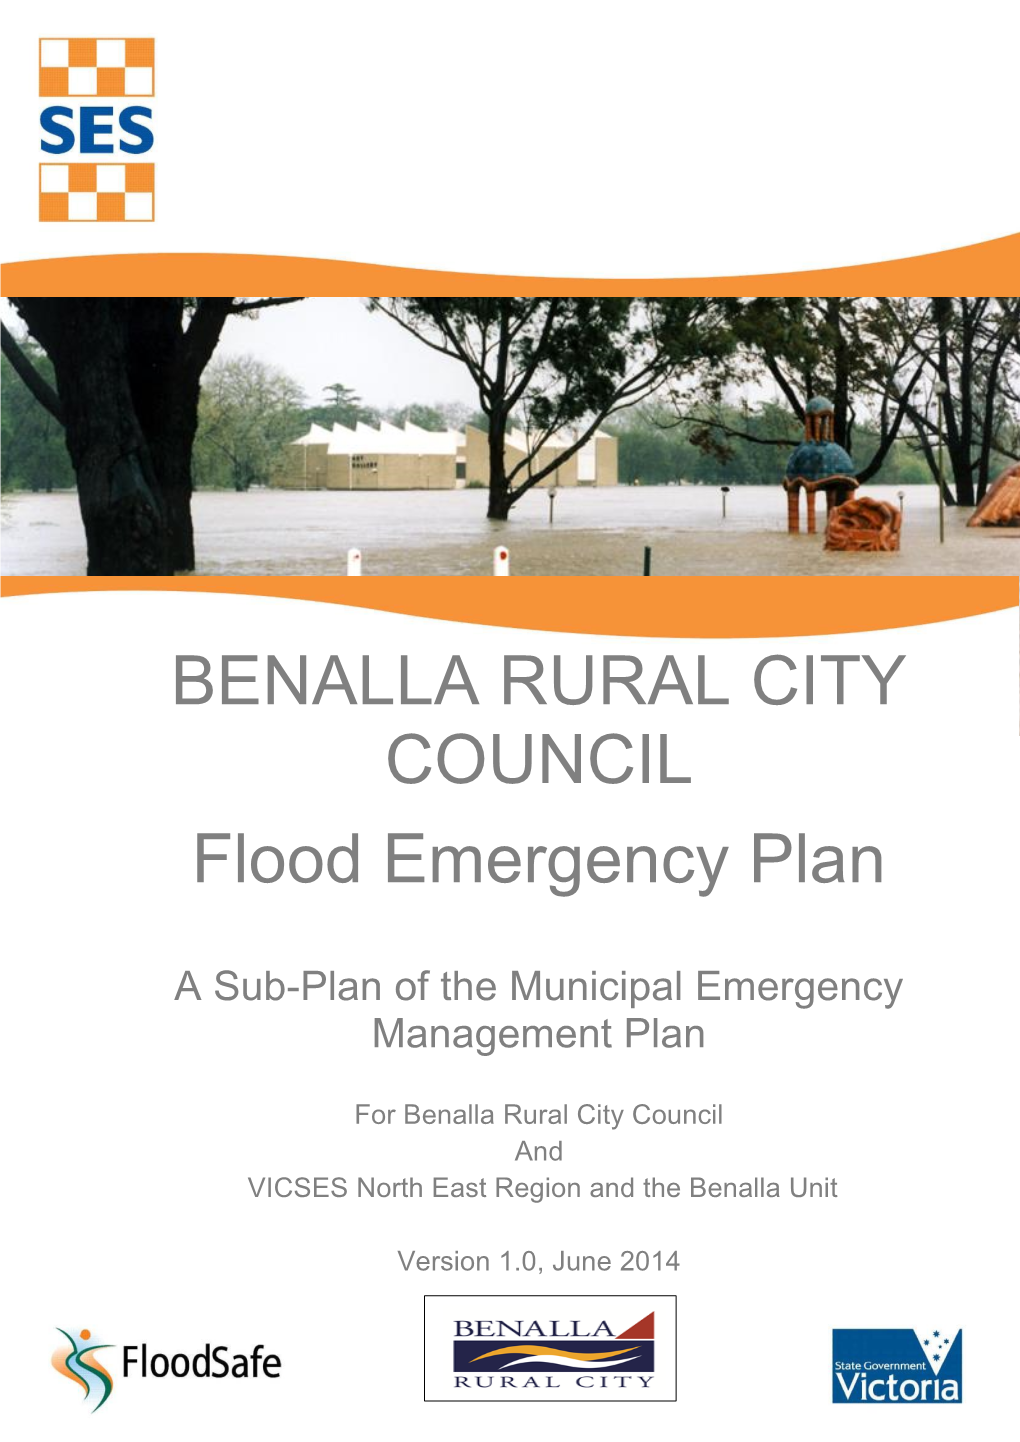 Municipal Flood Emergency Plan (MFEP) Will Be Amended, Maintained and Distributed As Required by VICSES in Consultation with the Benalla Rural City Council